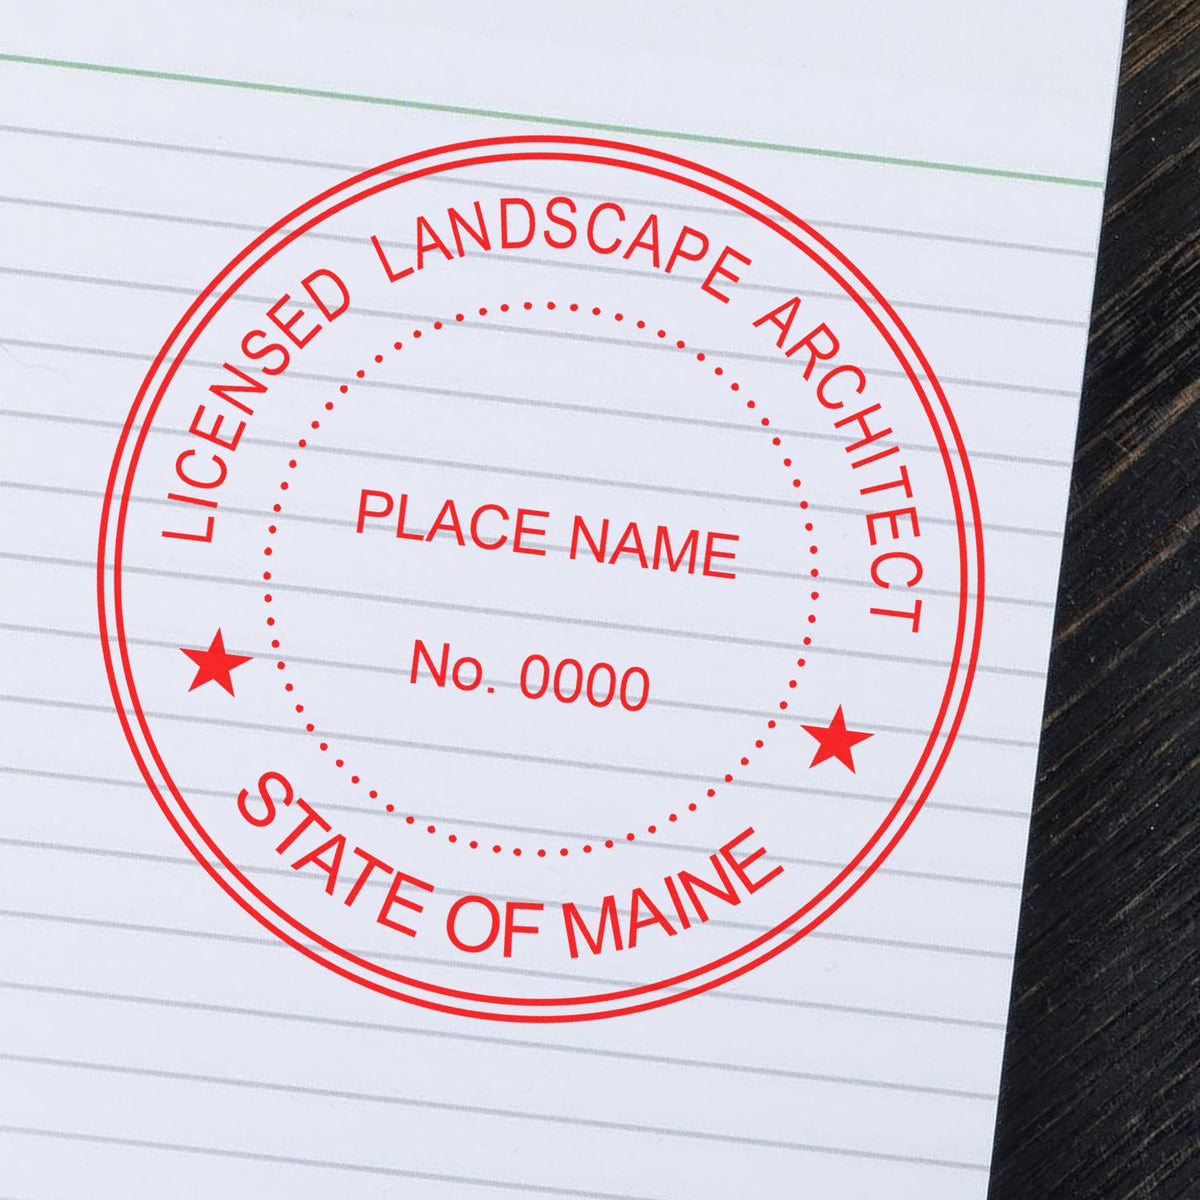 A photograph of the Digital Maine Landscape Architect Stamp stamp impression reveals a vivid, professional image of the on paper.